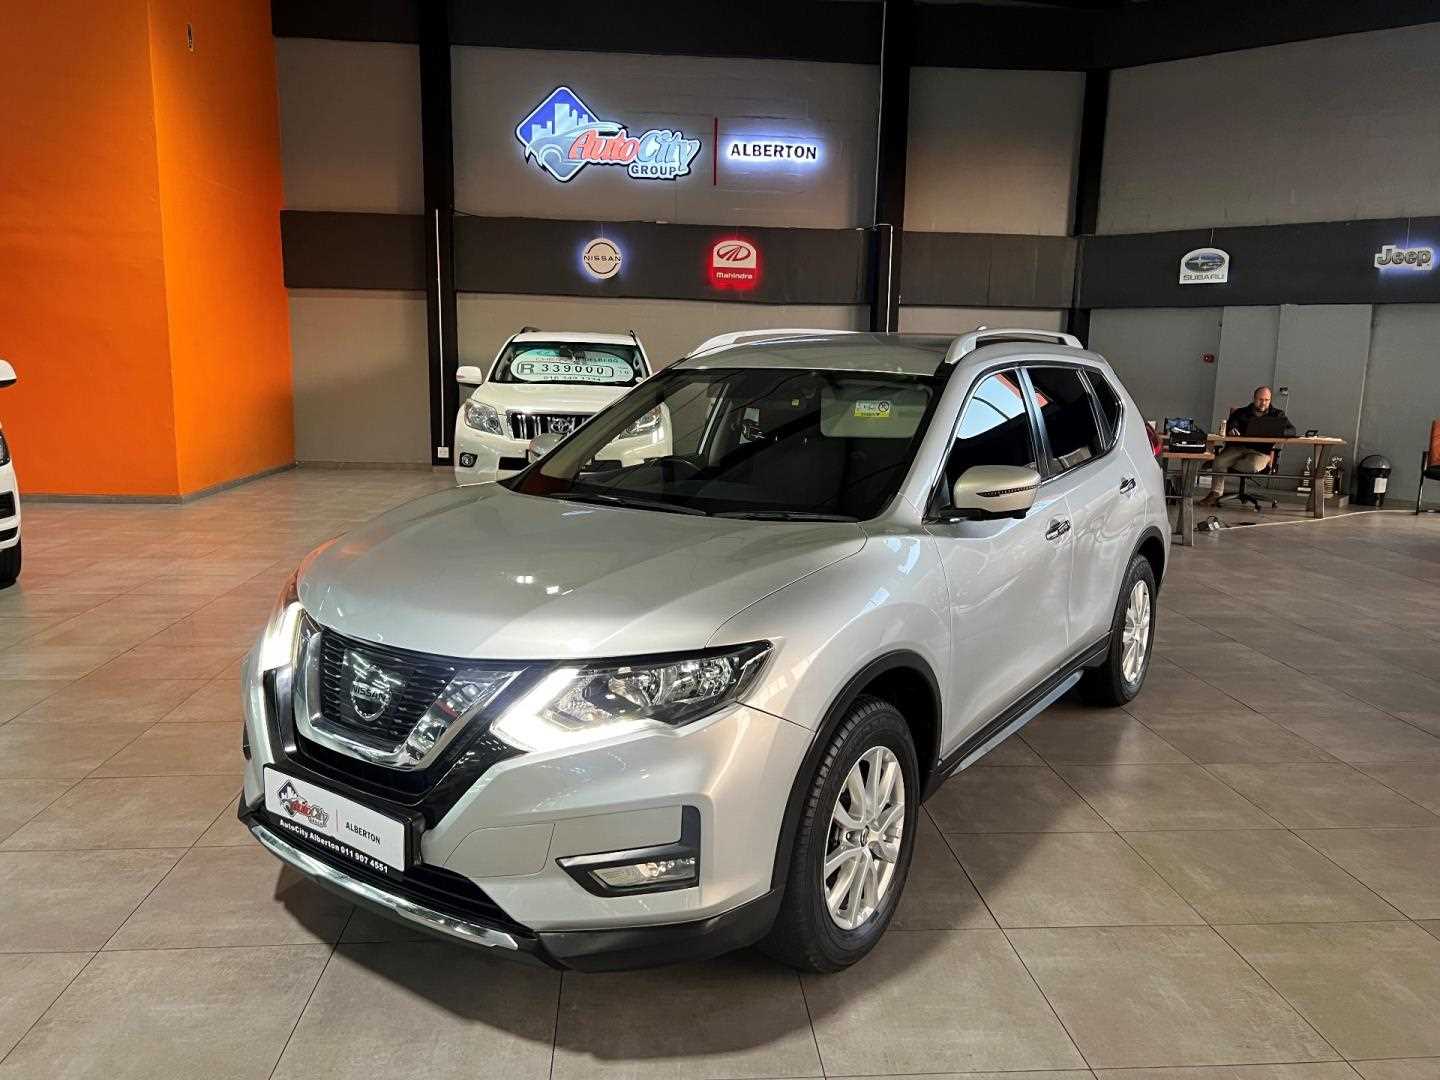 Nissan X TRAIL 2.5 ACENTA 4X4 CVT for Sale in South Africa